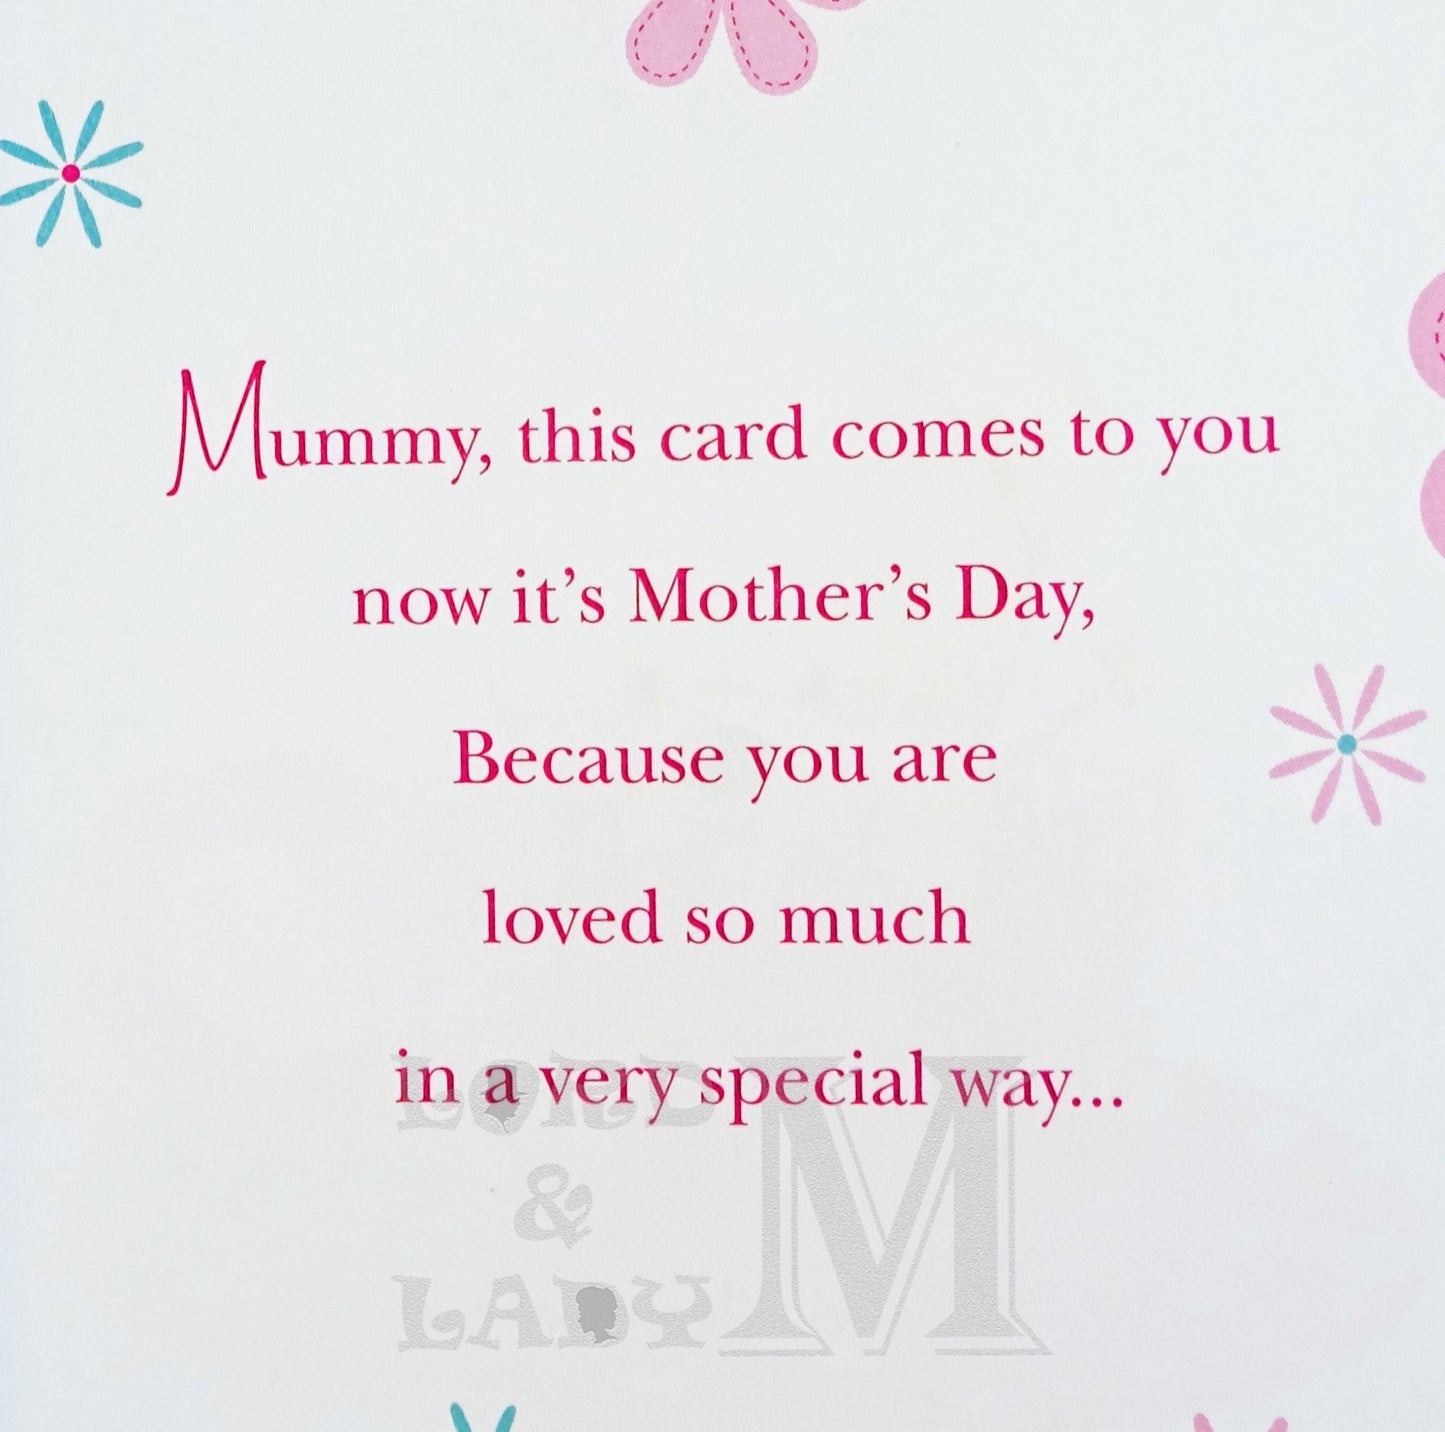 23cm - With Love, Mummy On Mother's Day - E